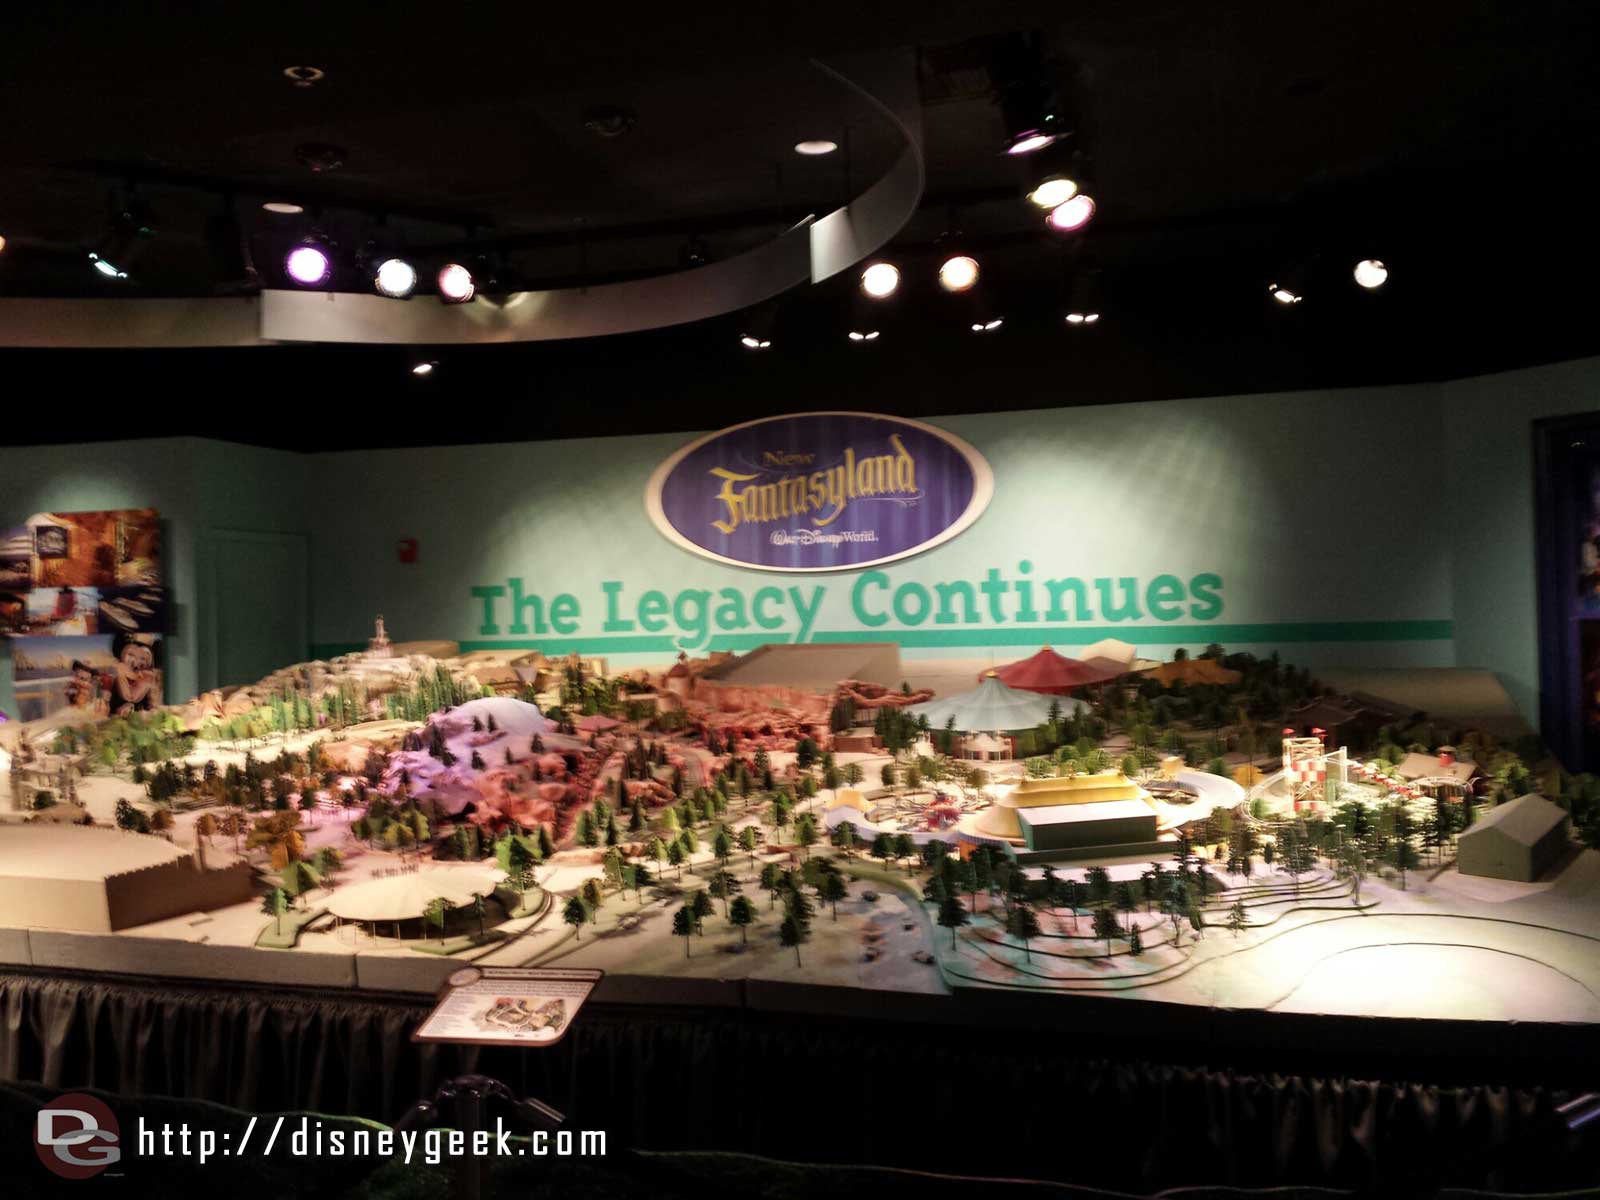 A model of the New Fantasyland portion of the Magic Kingdom